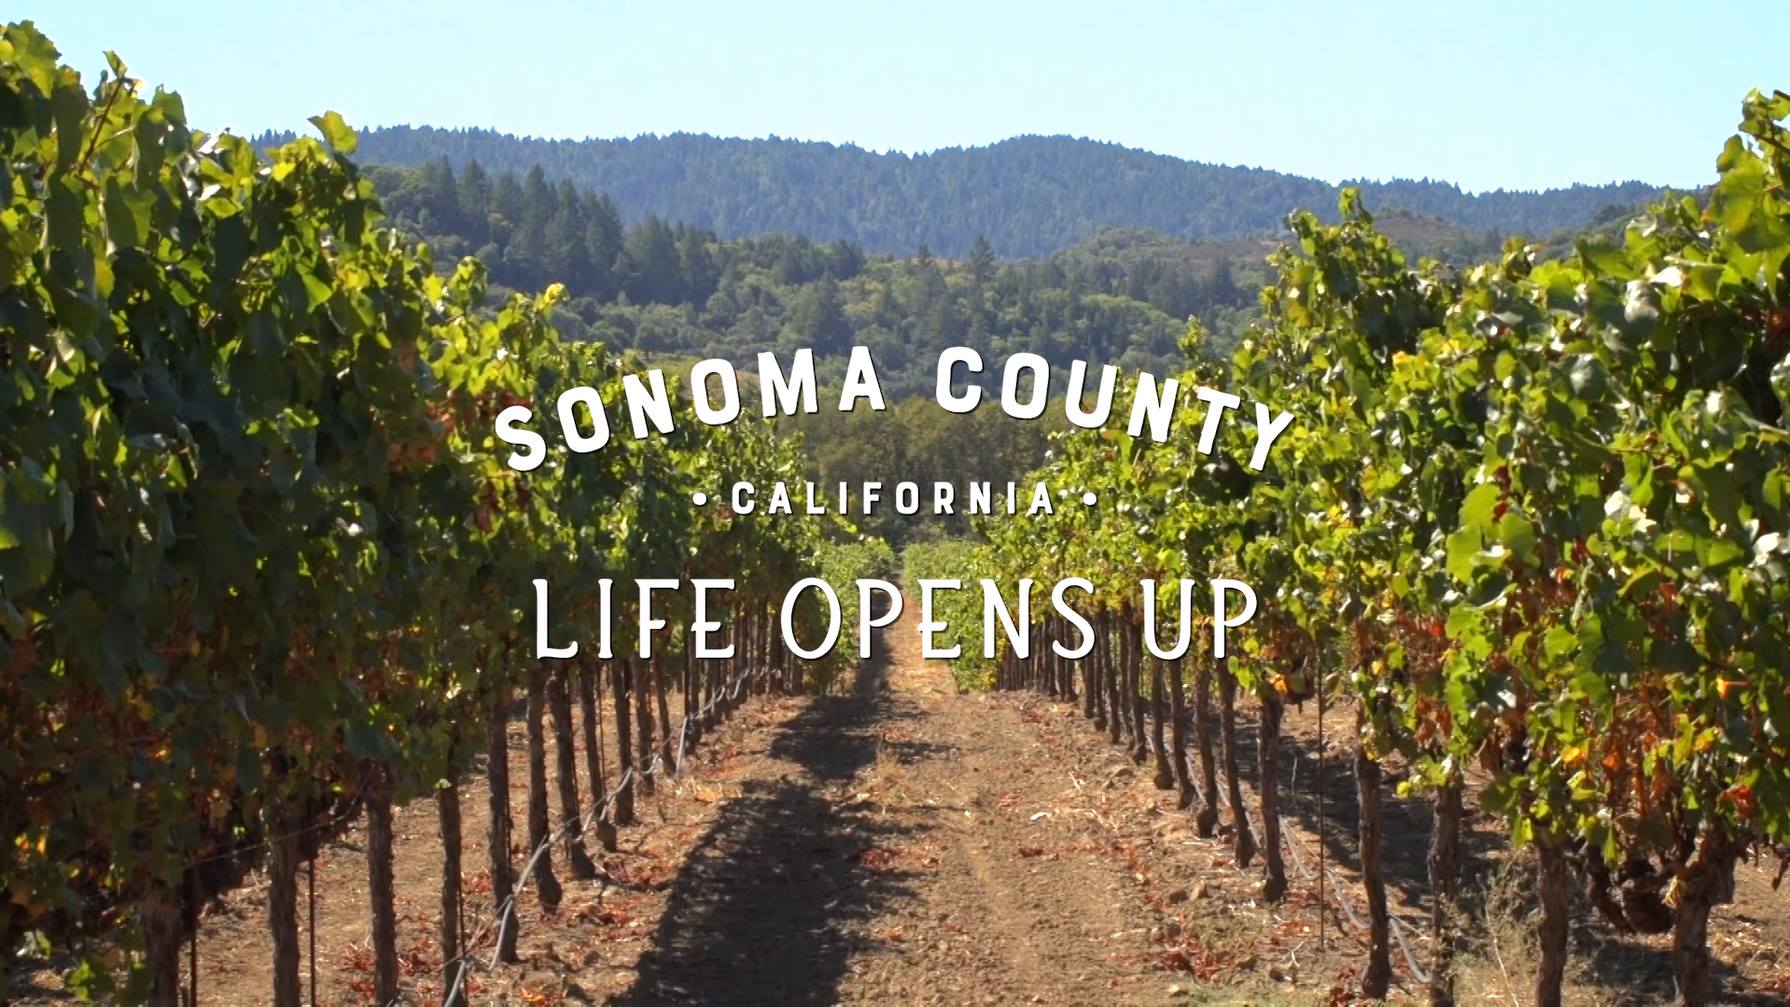 Sonoma County, CA. Life Opens Up. Vineyard with green leaves and grapes and forested hills and mountains in the background.